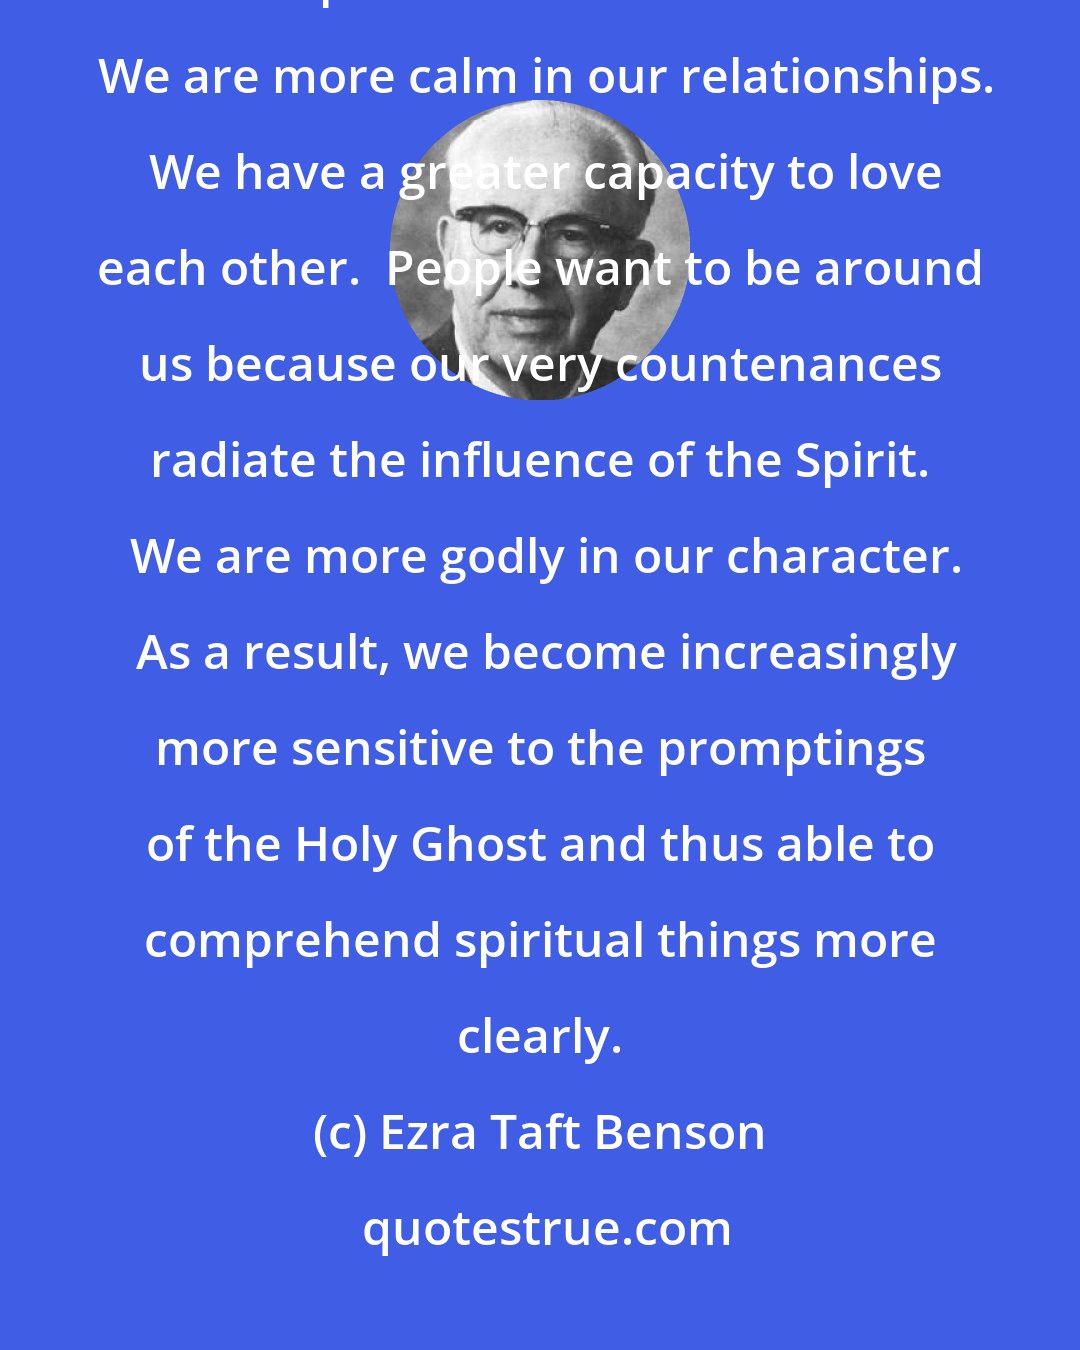 Ezra Taft Benson: The Holy Ghost causes our feelings to be more tender.  We feel more charitable and compassionate with each other.  We are more calm in our relationships.  We have a greater capacity to love each other.  People want to be around us because our very countenances radiate the influence of the Spirit.  We are more godly in our character.  As a result, we become increasingly more sensitive to the promptings of the Holy Ghost and thus able to comprehend spiritual things more clearly.